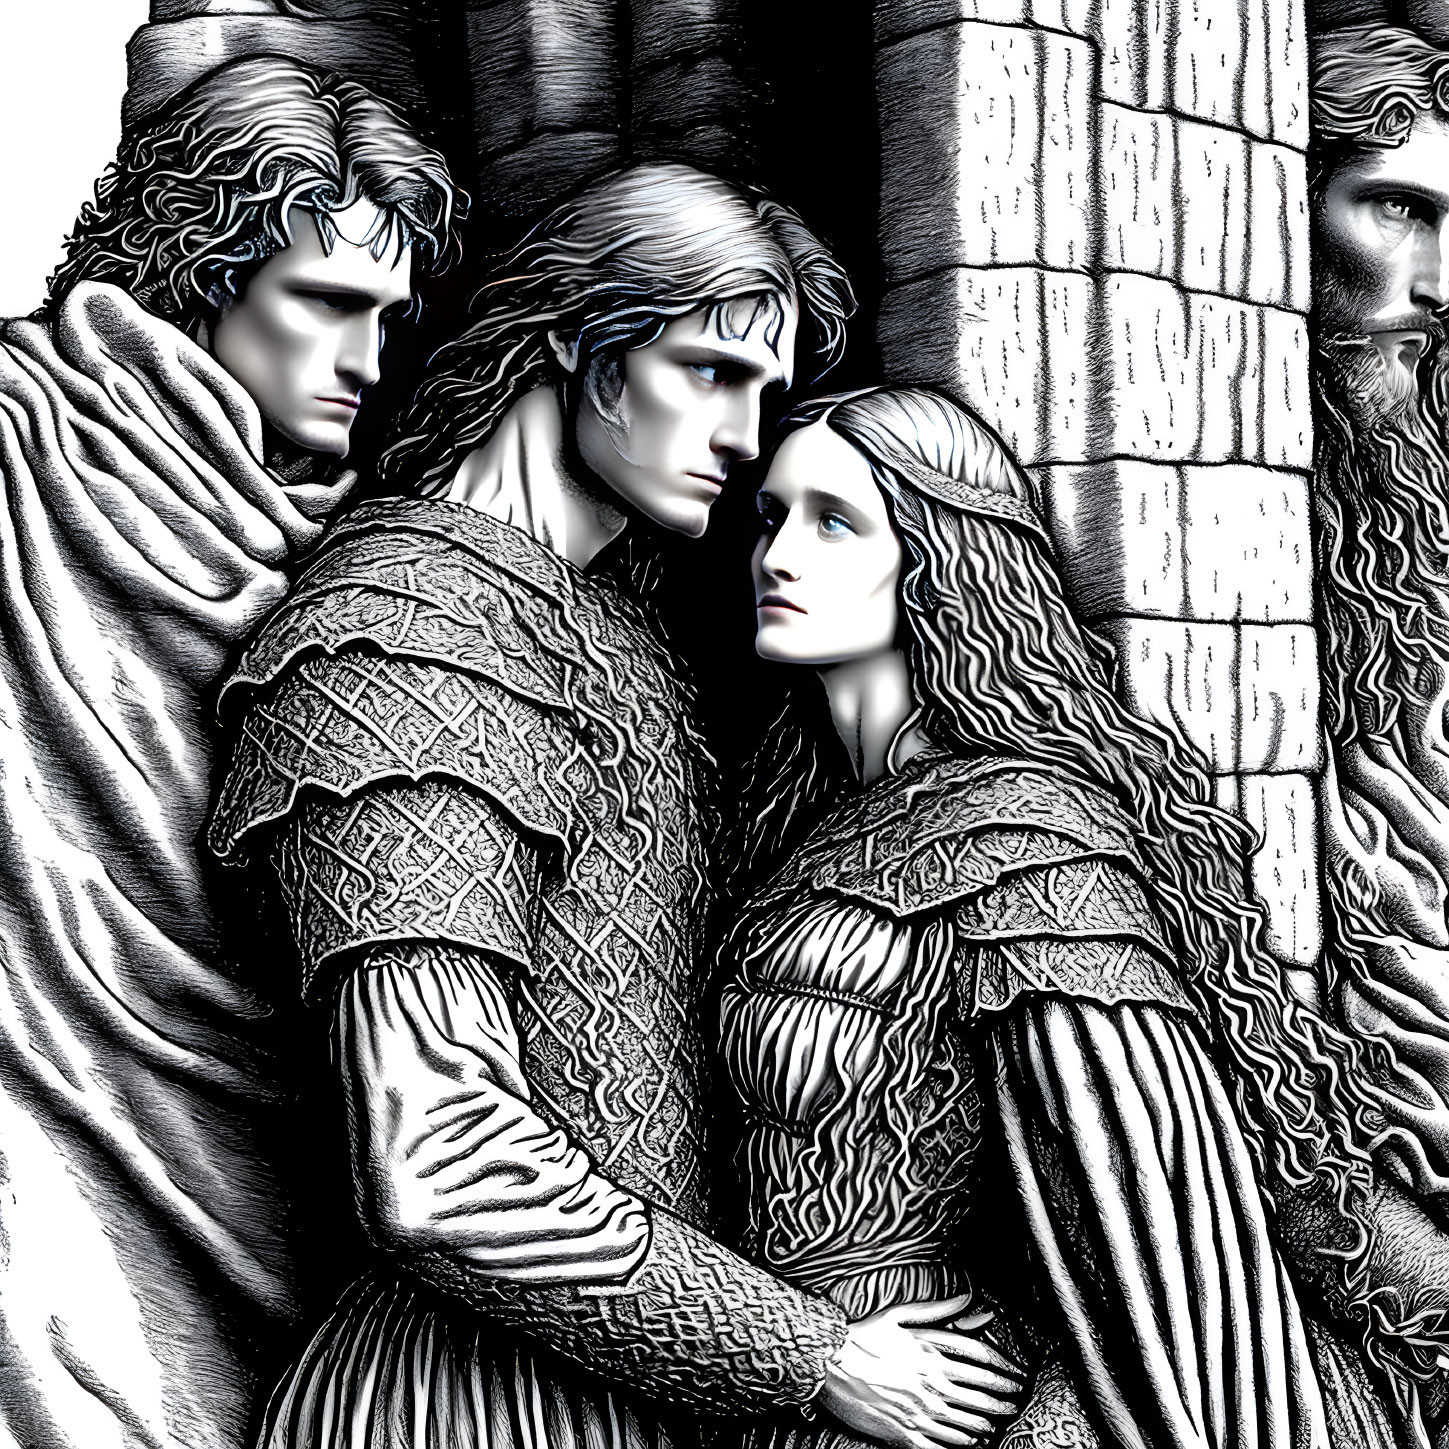 Monochrome medieval characters illustration with intricate armor and flowing hair